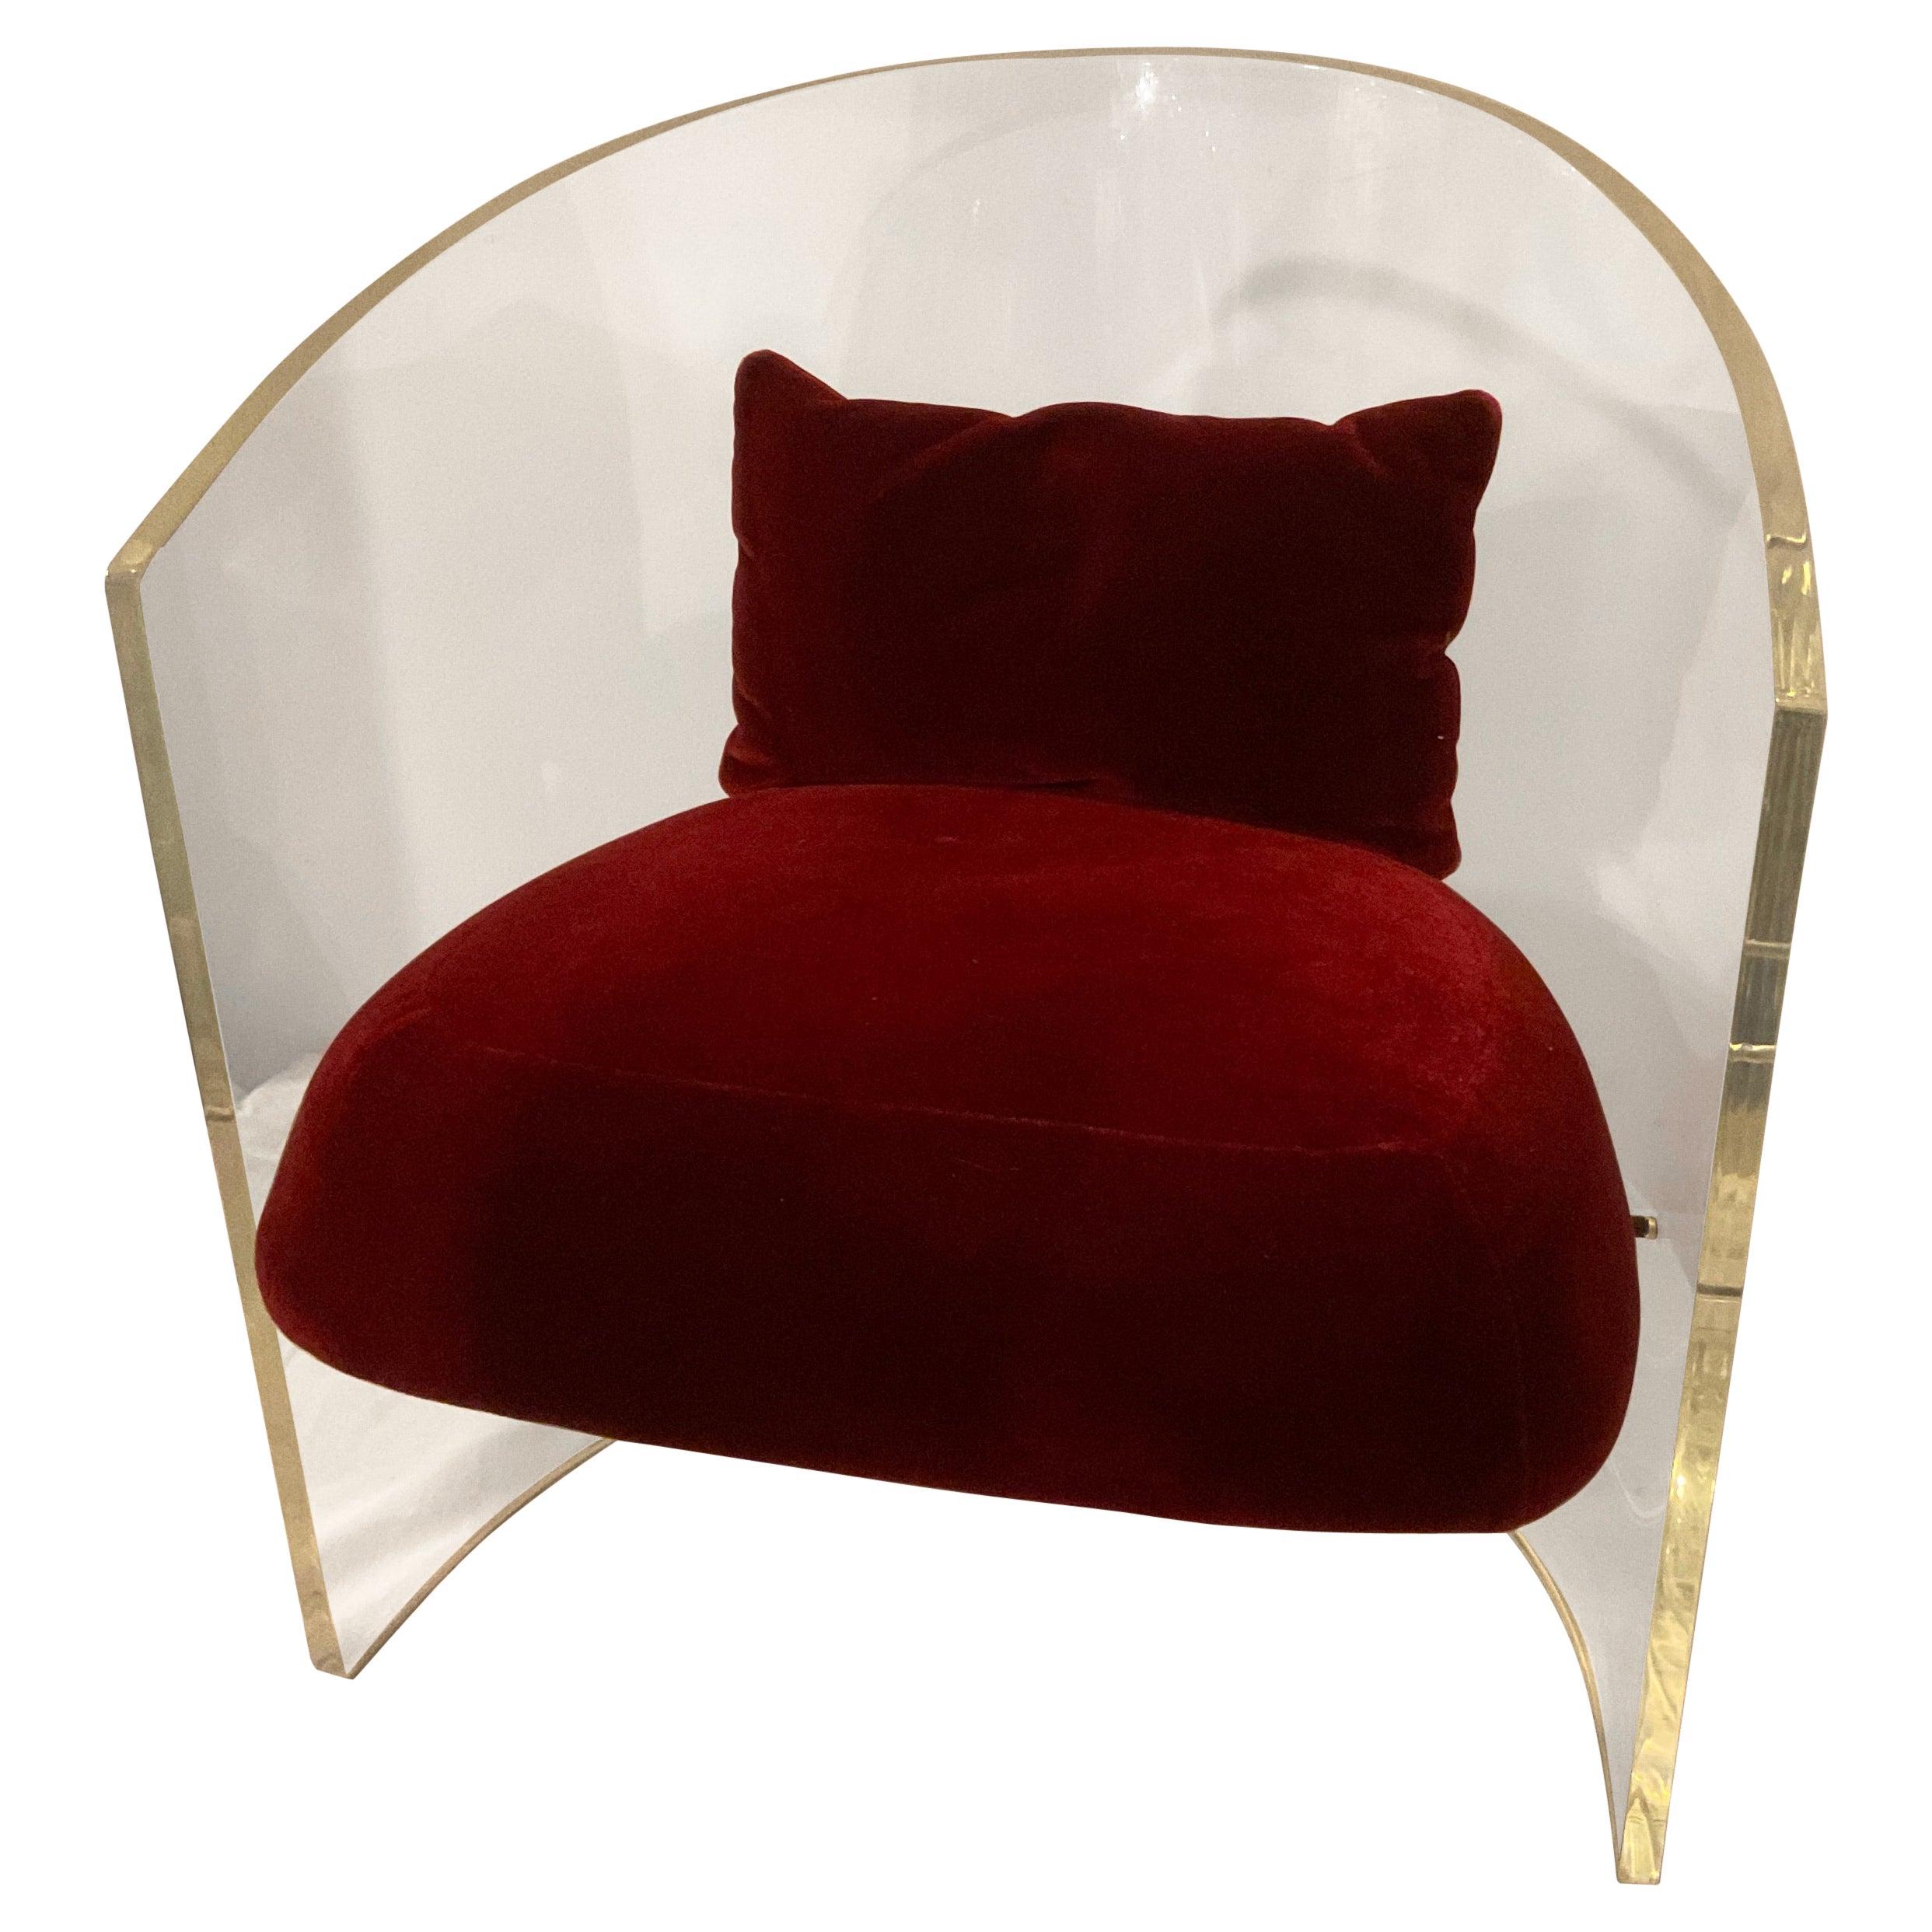  Lucite Barrel Chair By Pace For Sale